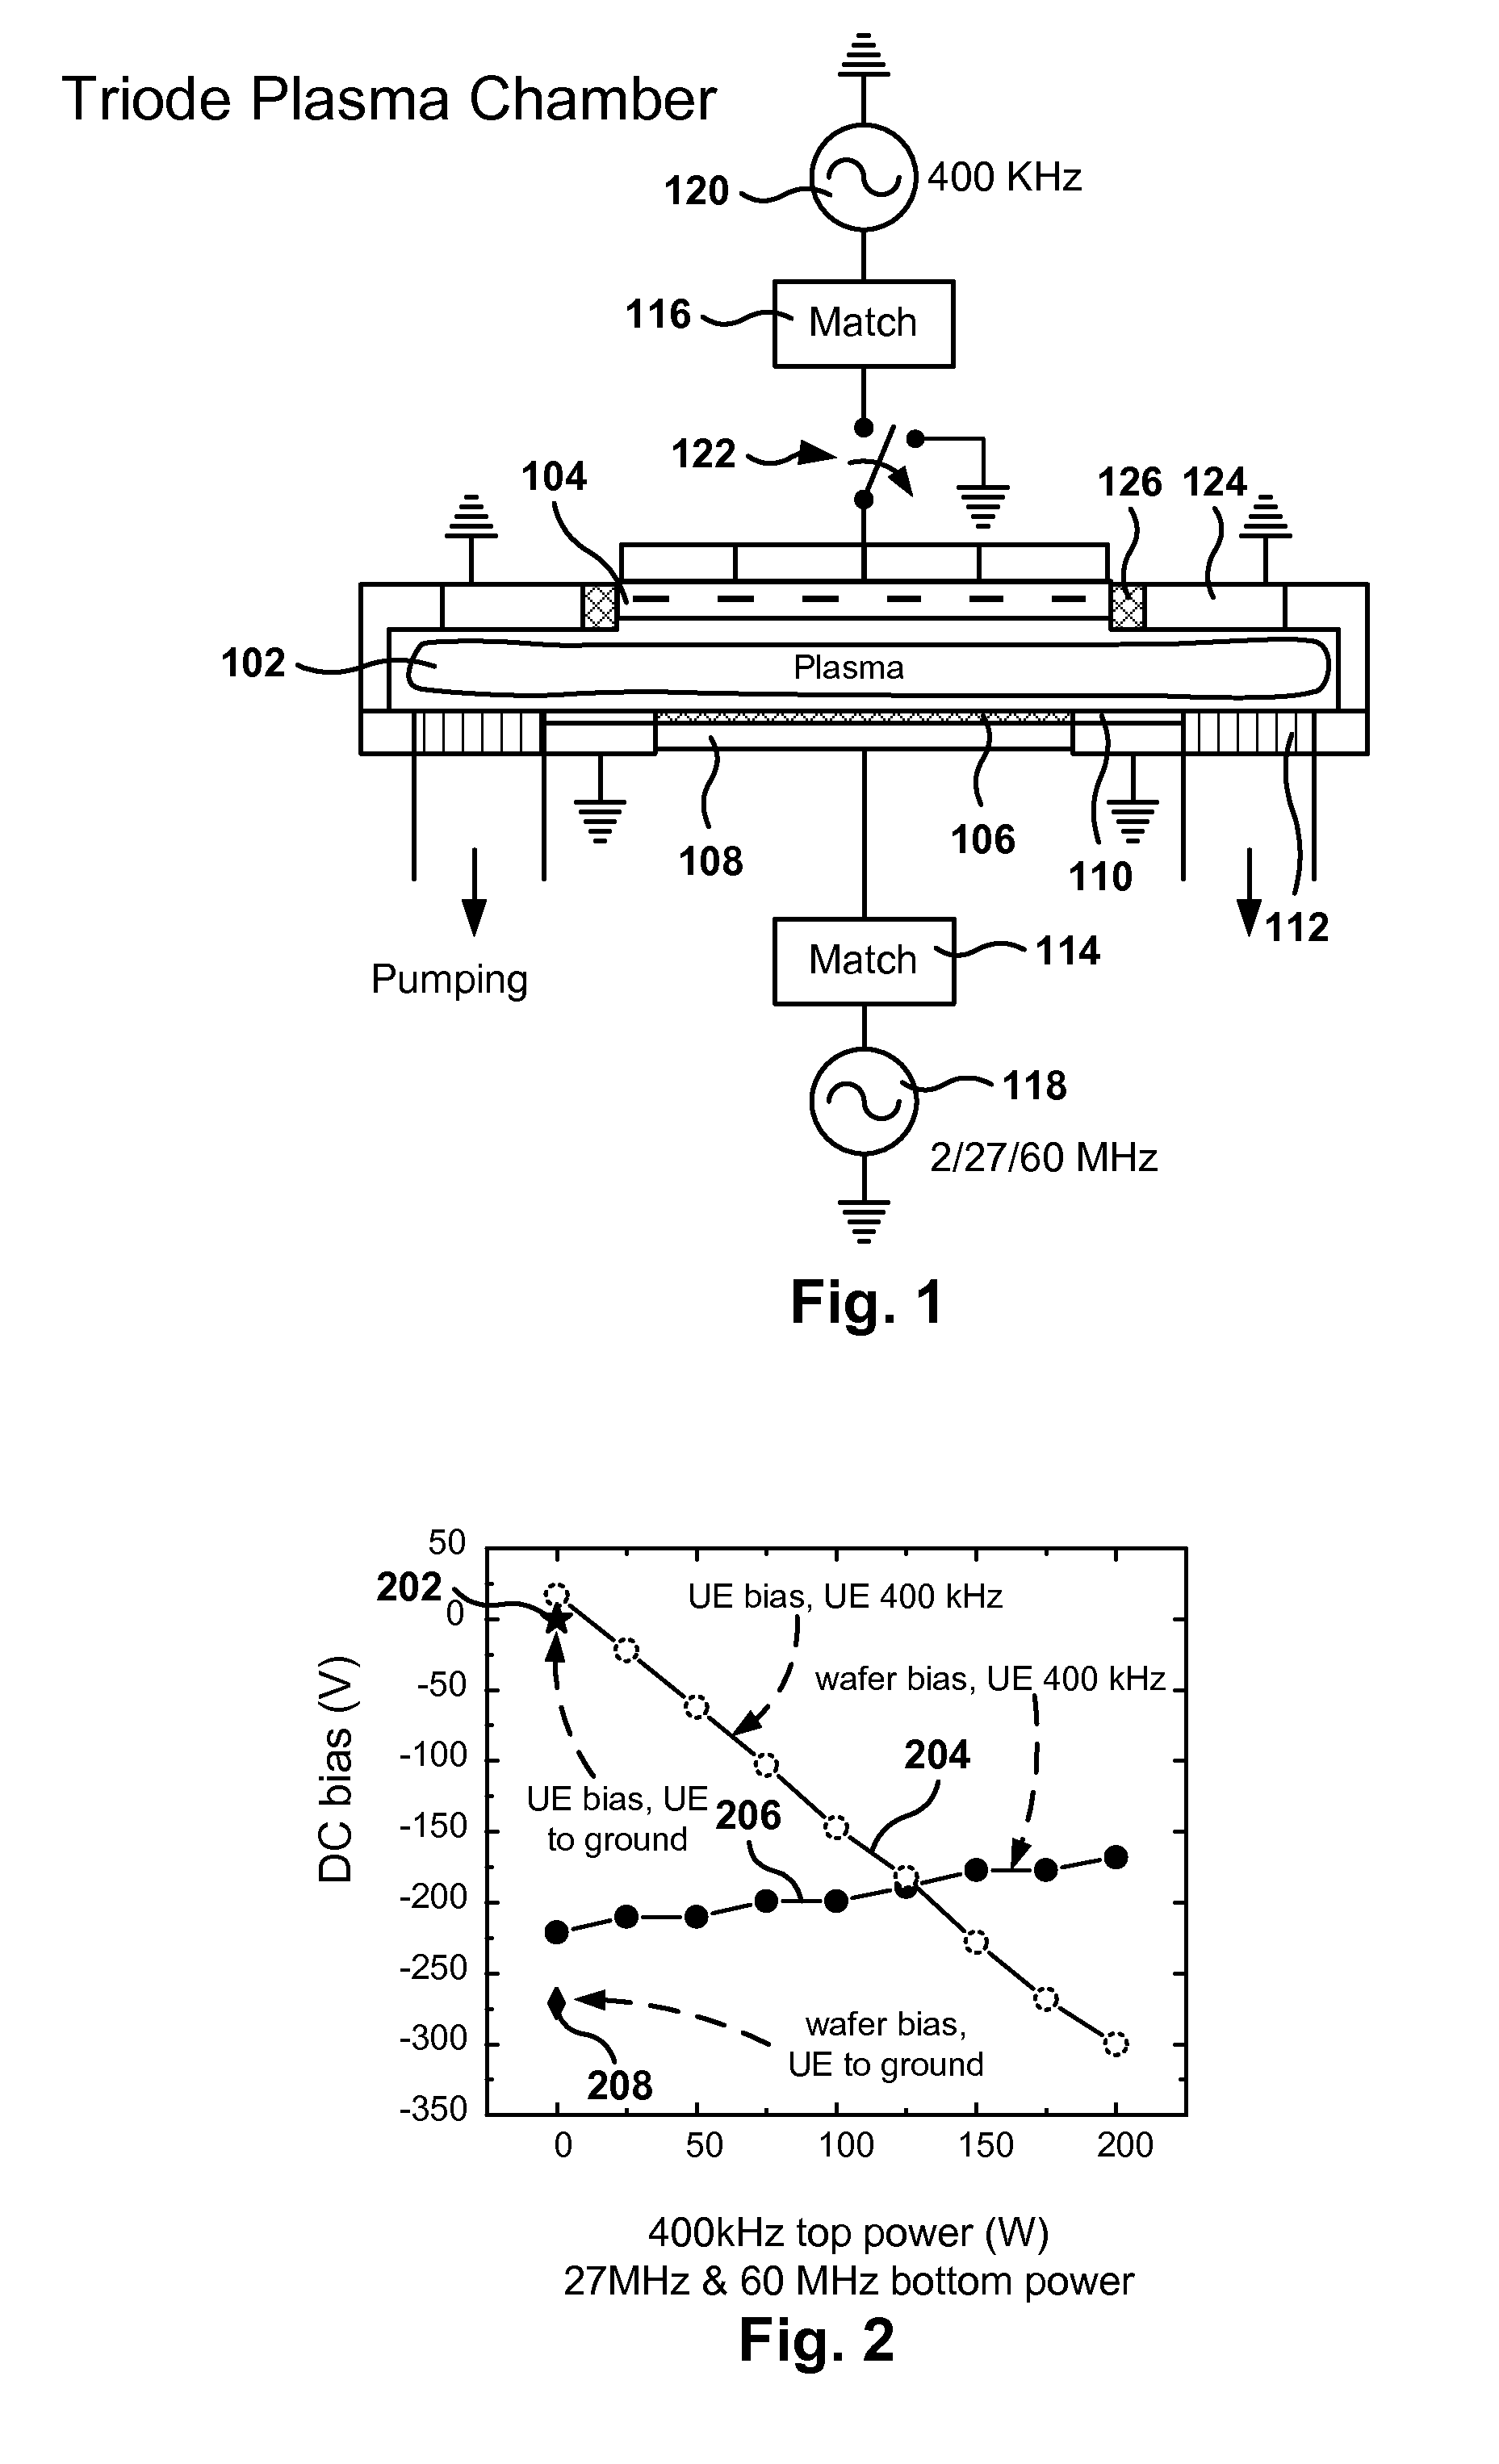 Triode reactor design with multiple radiofrequency powers